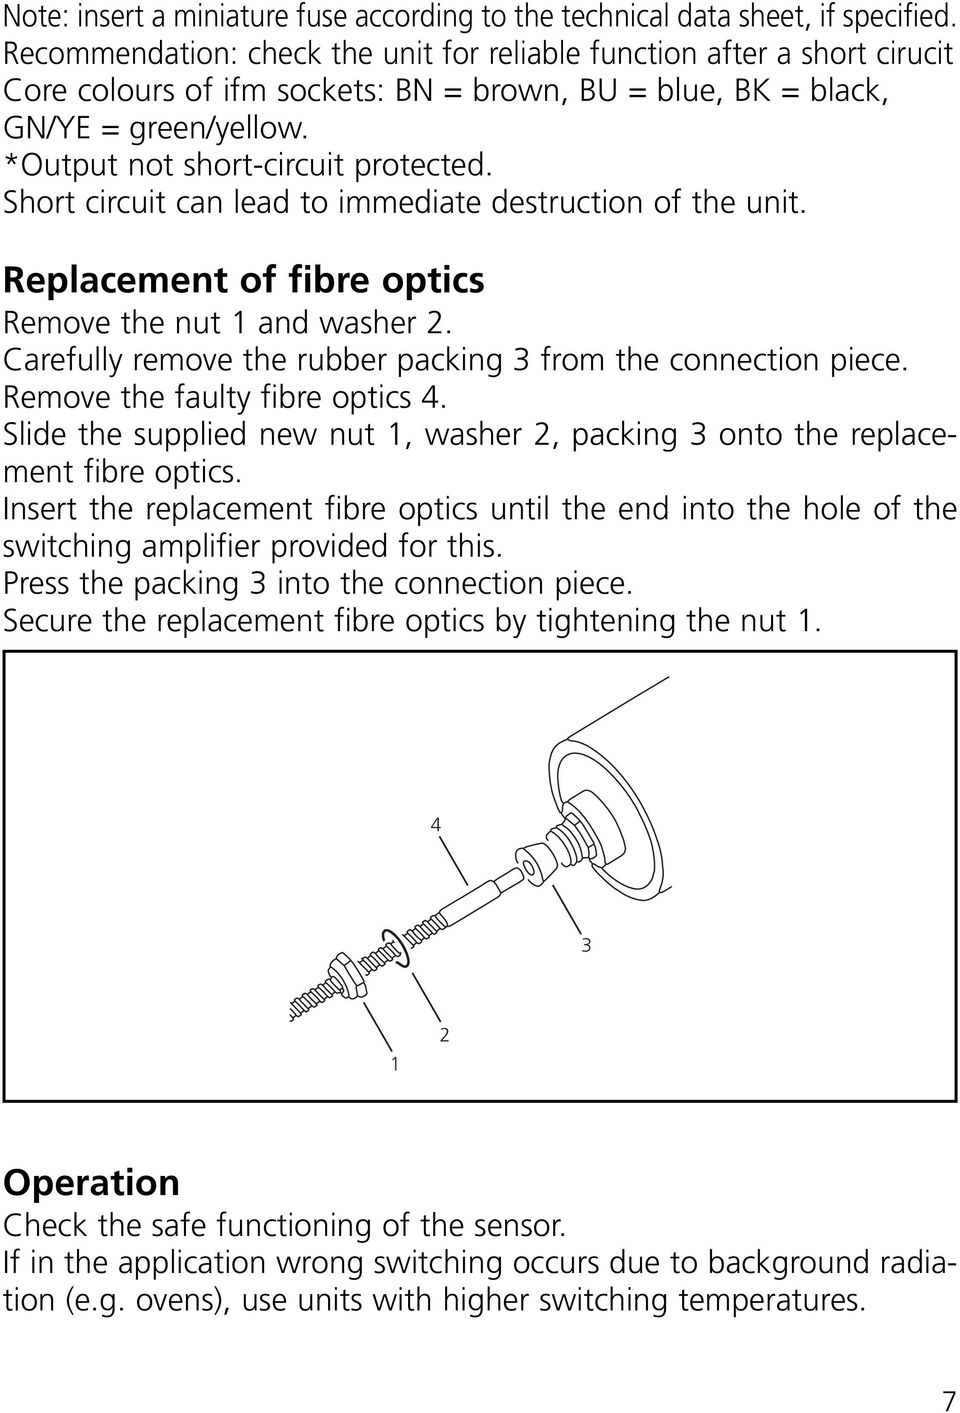 Short circuit can lead to immediate destruction of the unit. Replacement of fibre optics Remove the nut and washer. Carefully remove the rubber packing from the connection piece.